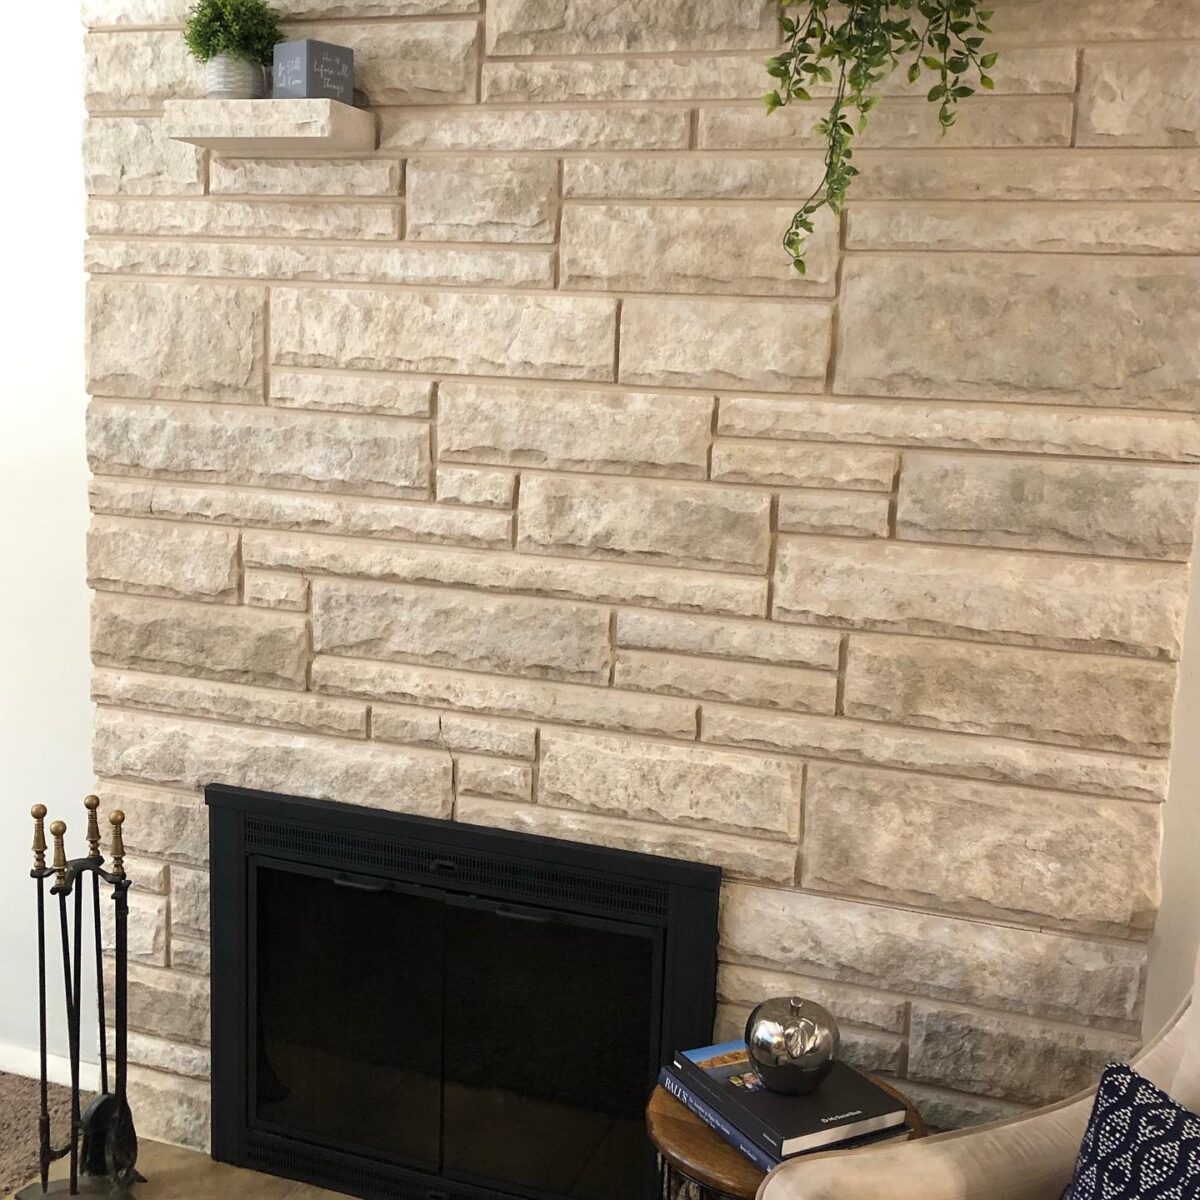 Stone fireplace painted with a natural gray color.